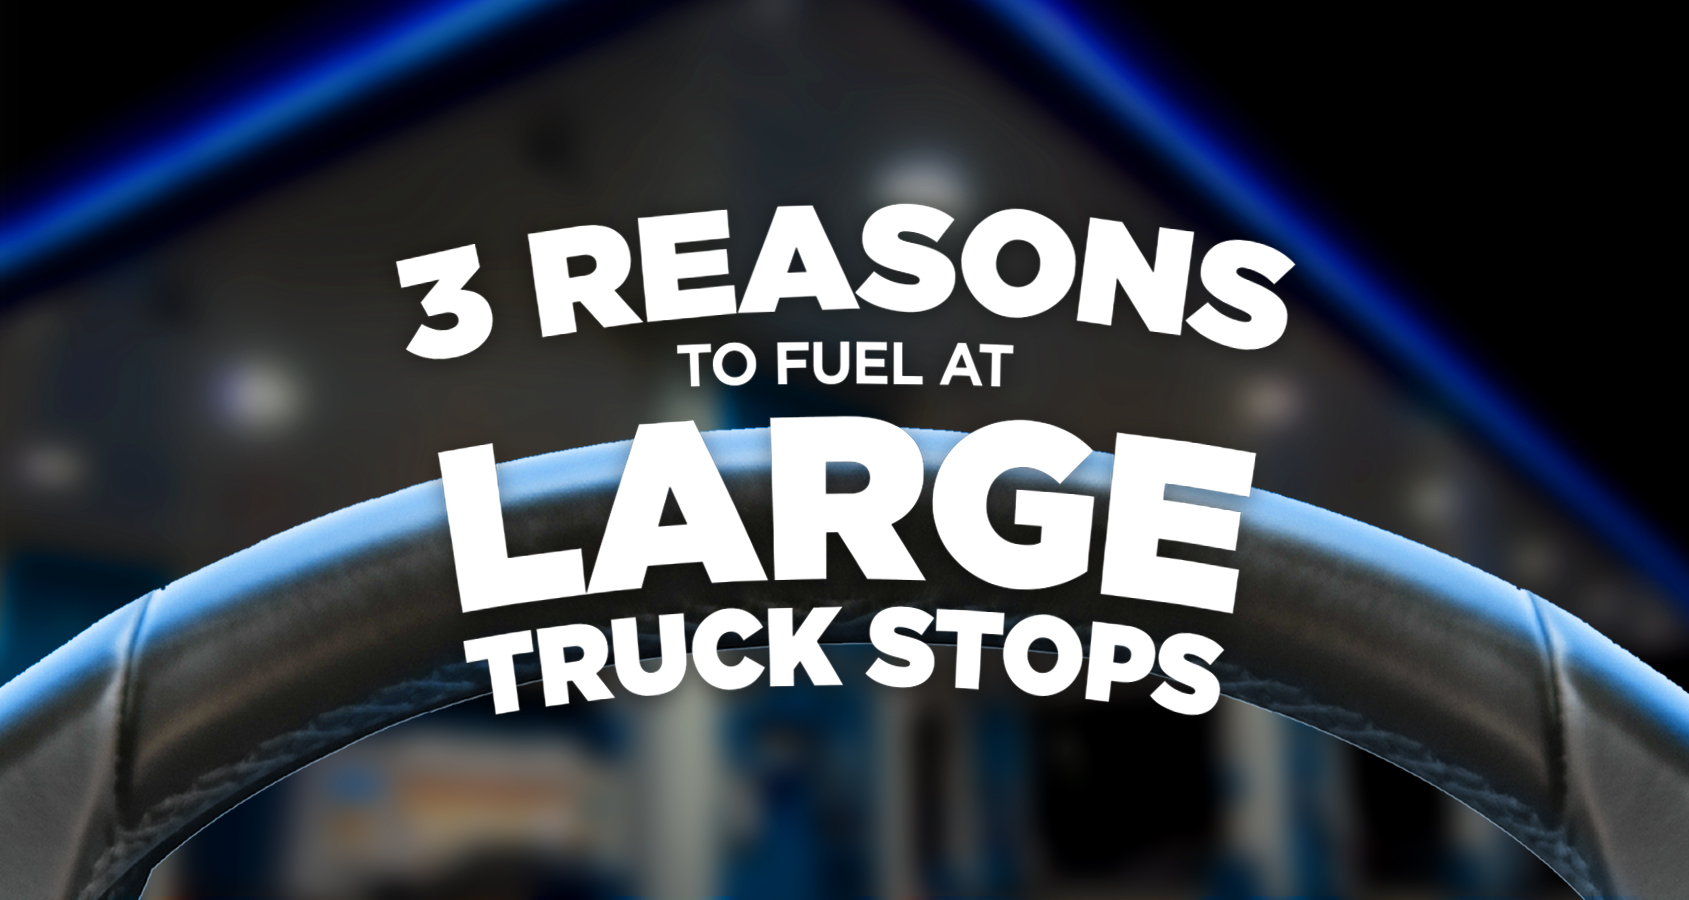 Fuel at Large Truck Stops